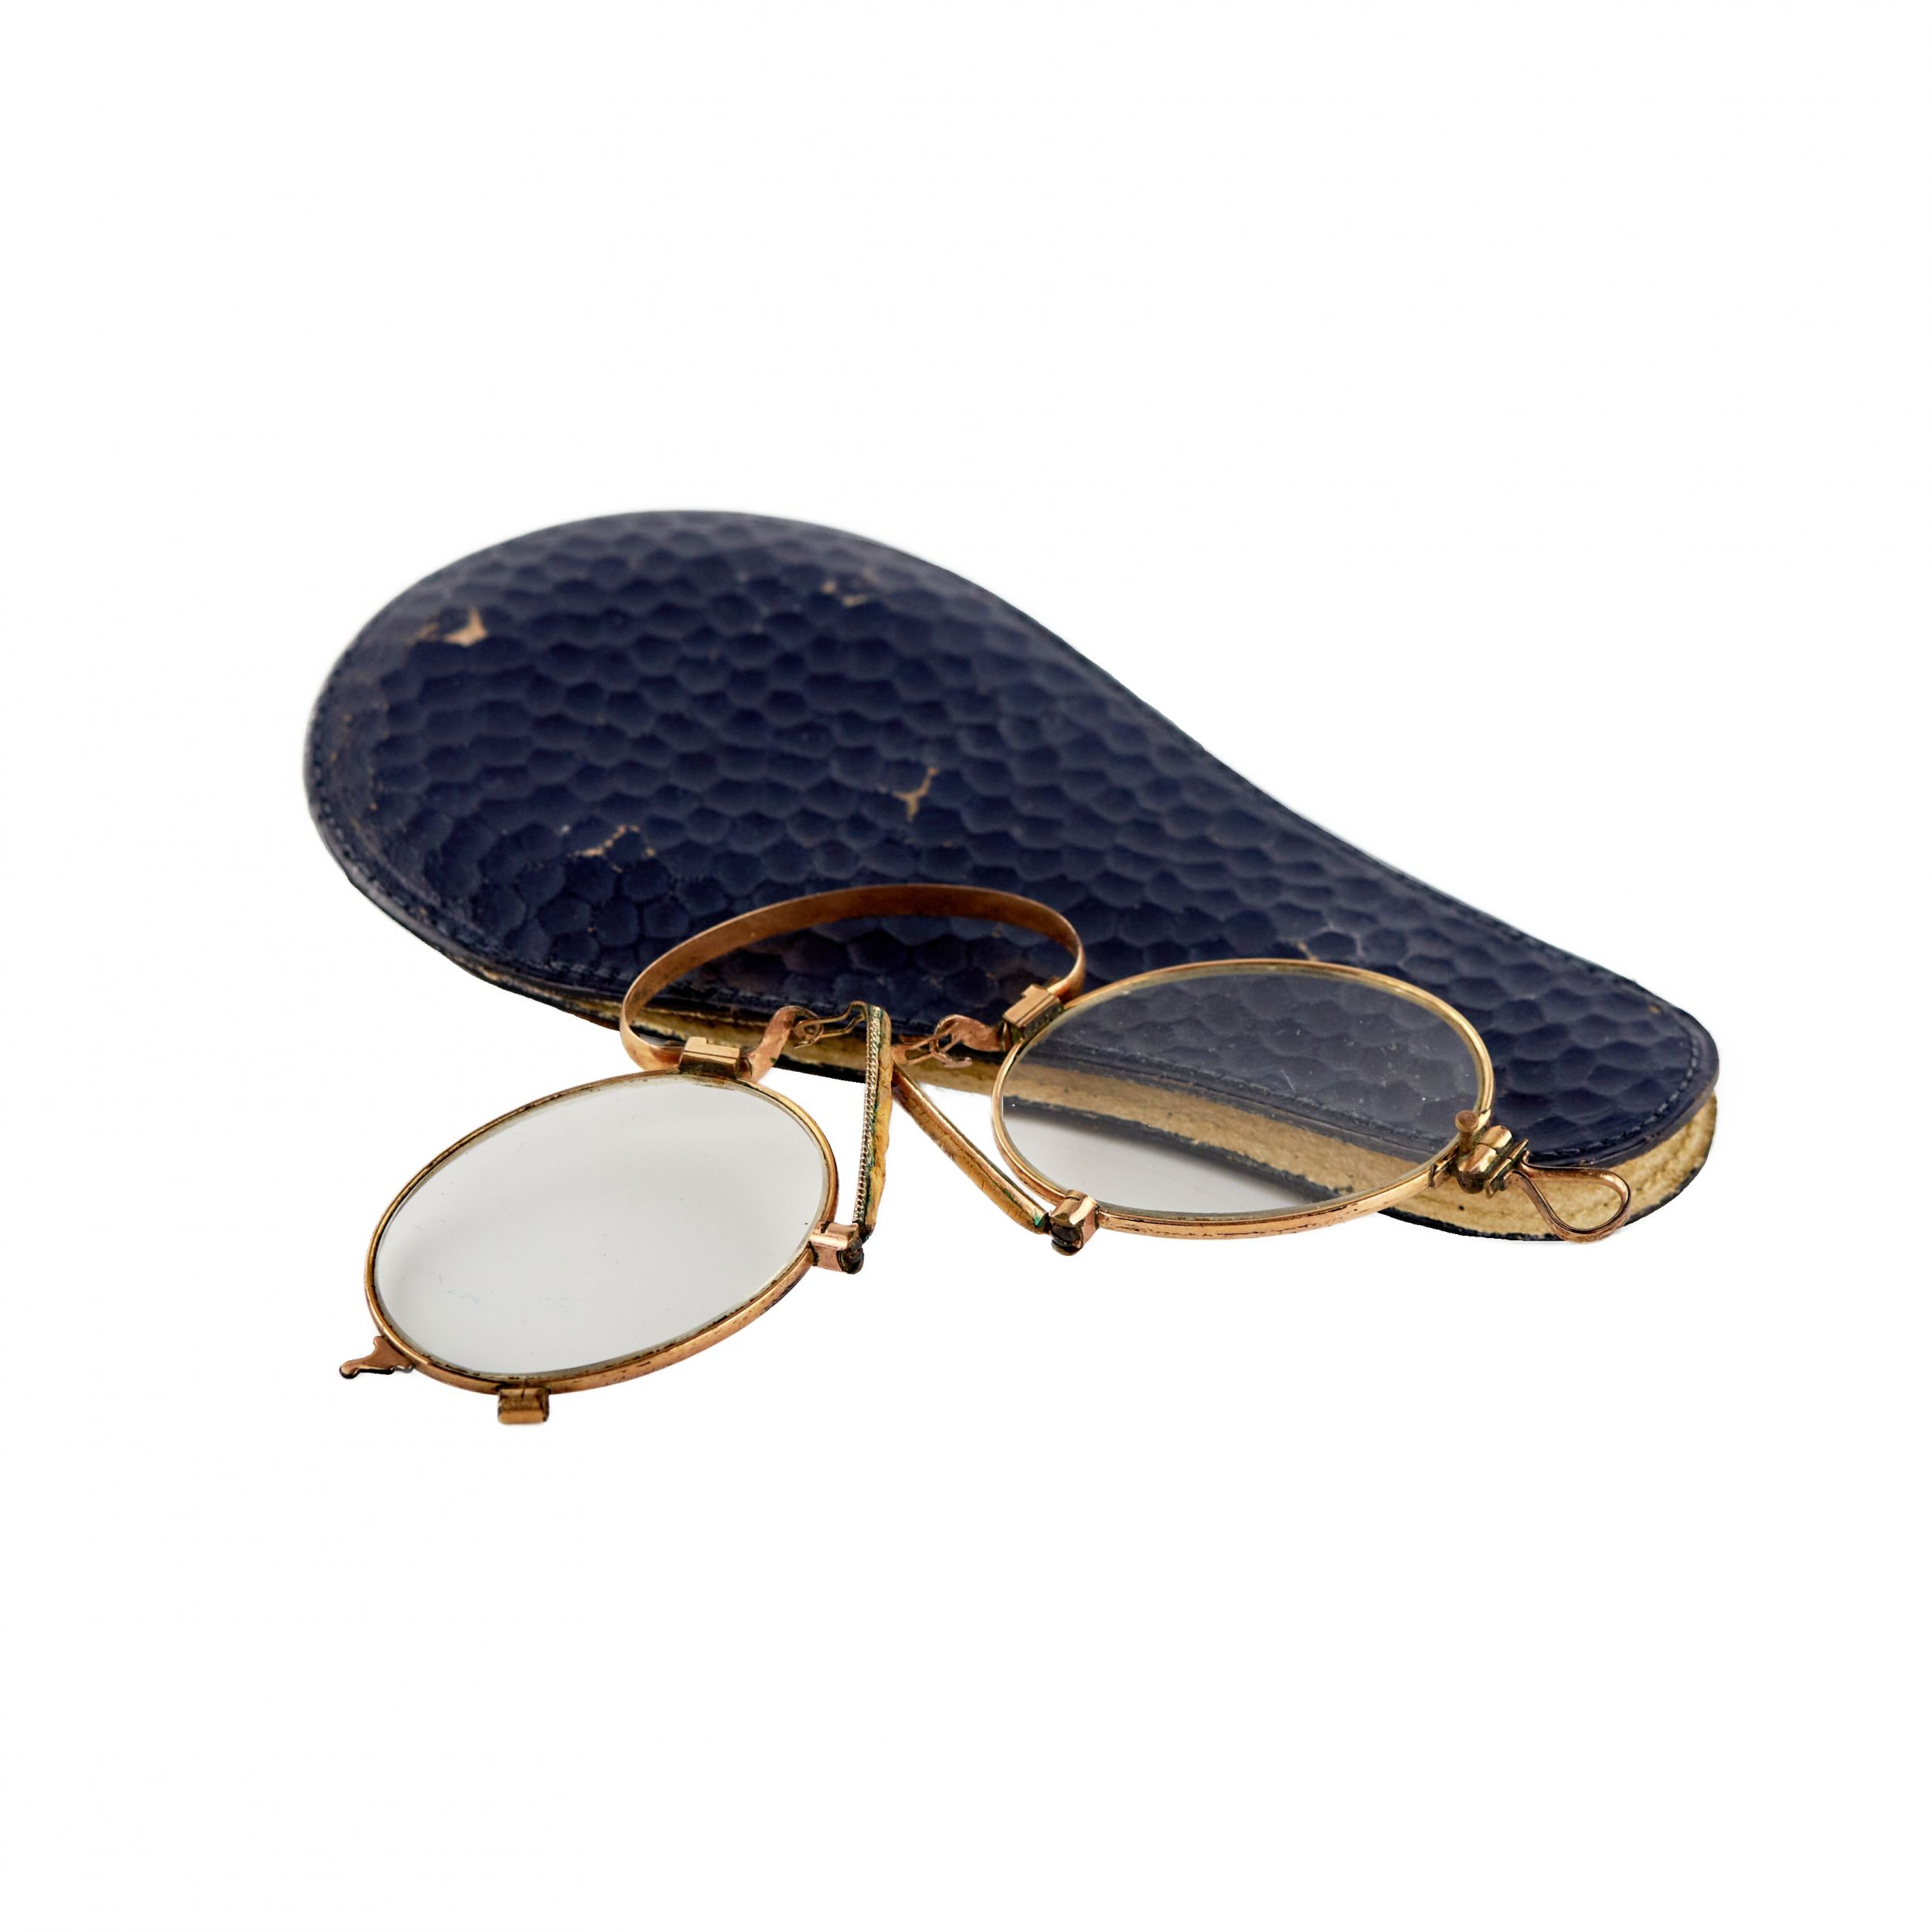 Pince-nez-in-a-leather-case-